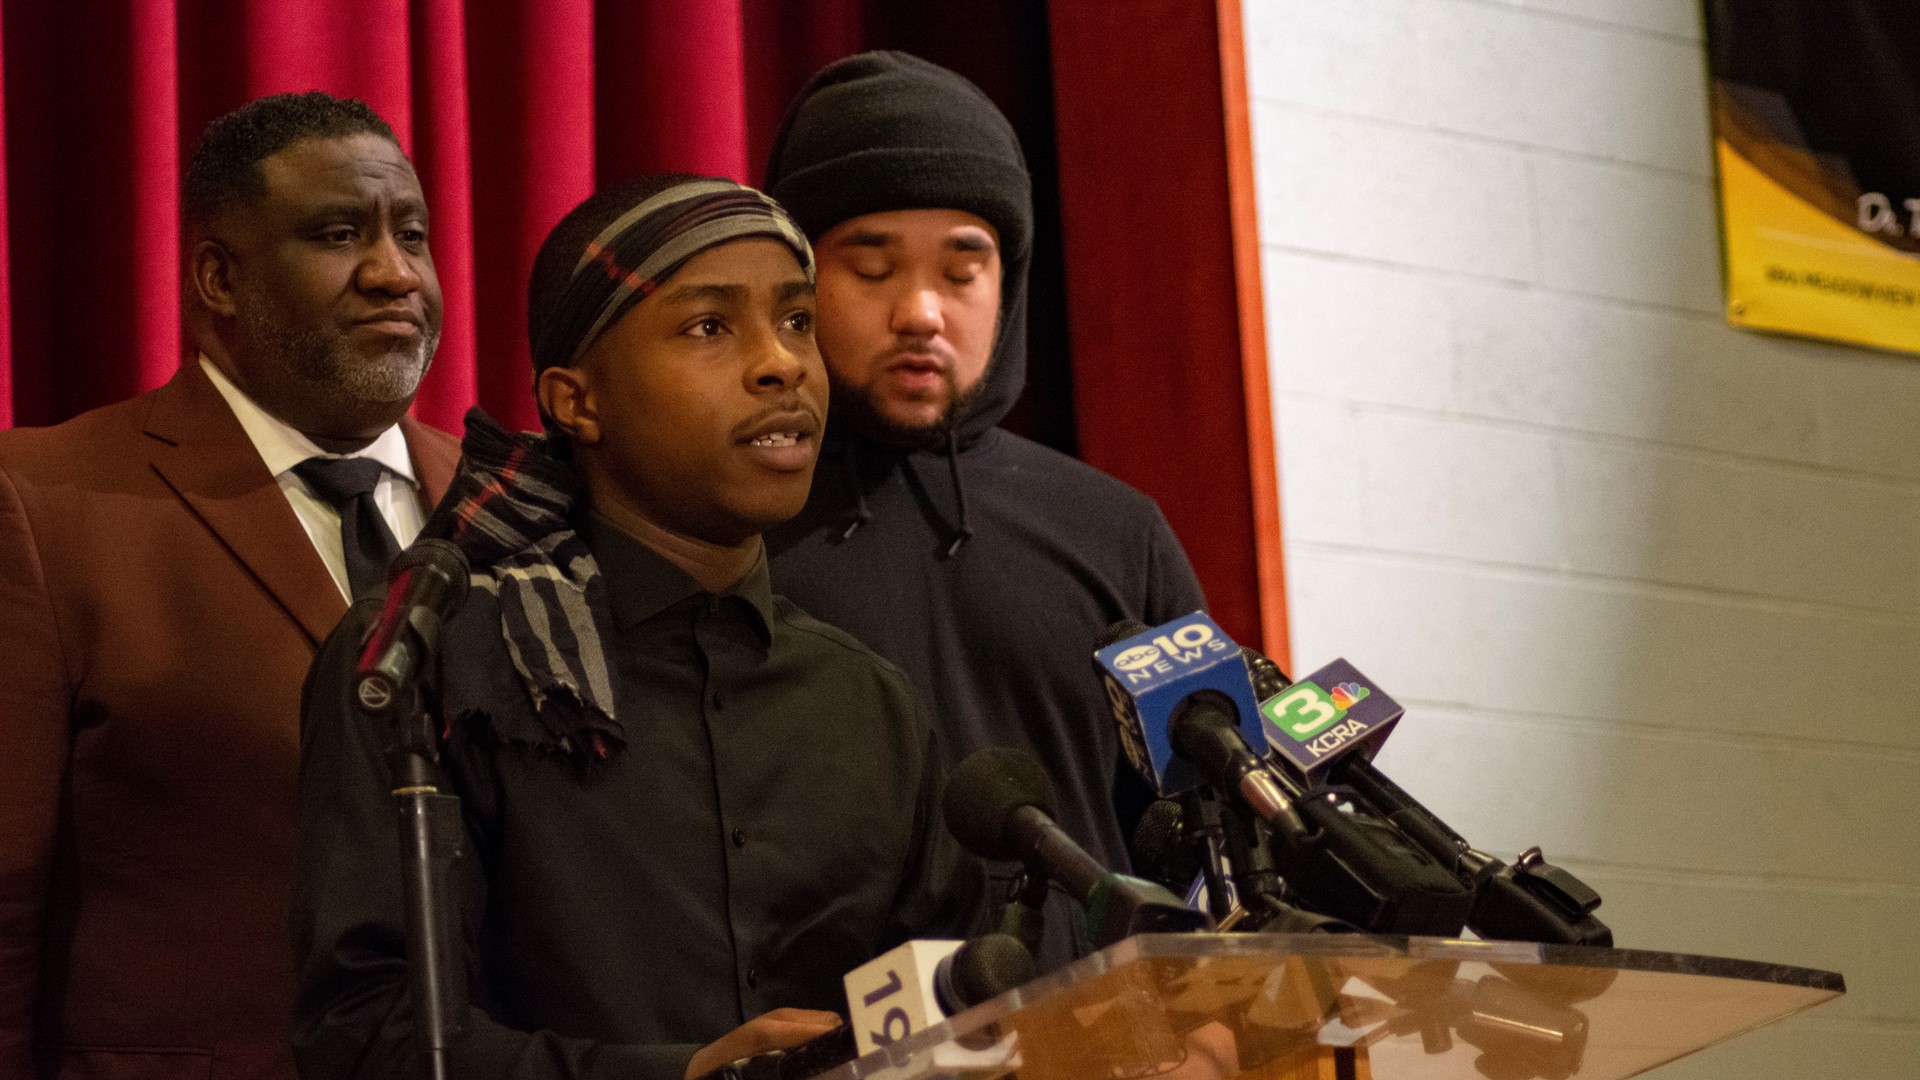 In response to no charges being brought against the officers in the shooting death of Stephon Clark, his family has called for legislative reform. In an effort to help the community heal, Stevante Clark announced an event to both help those communities heal and honor the memory of his brother.